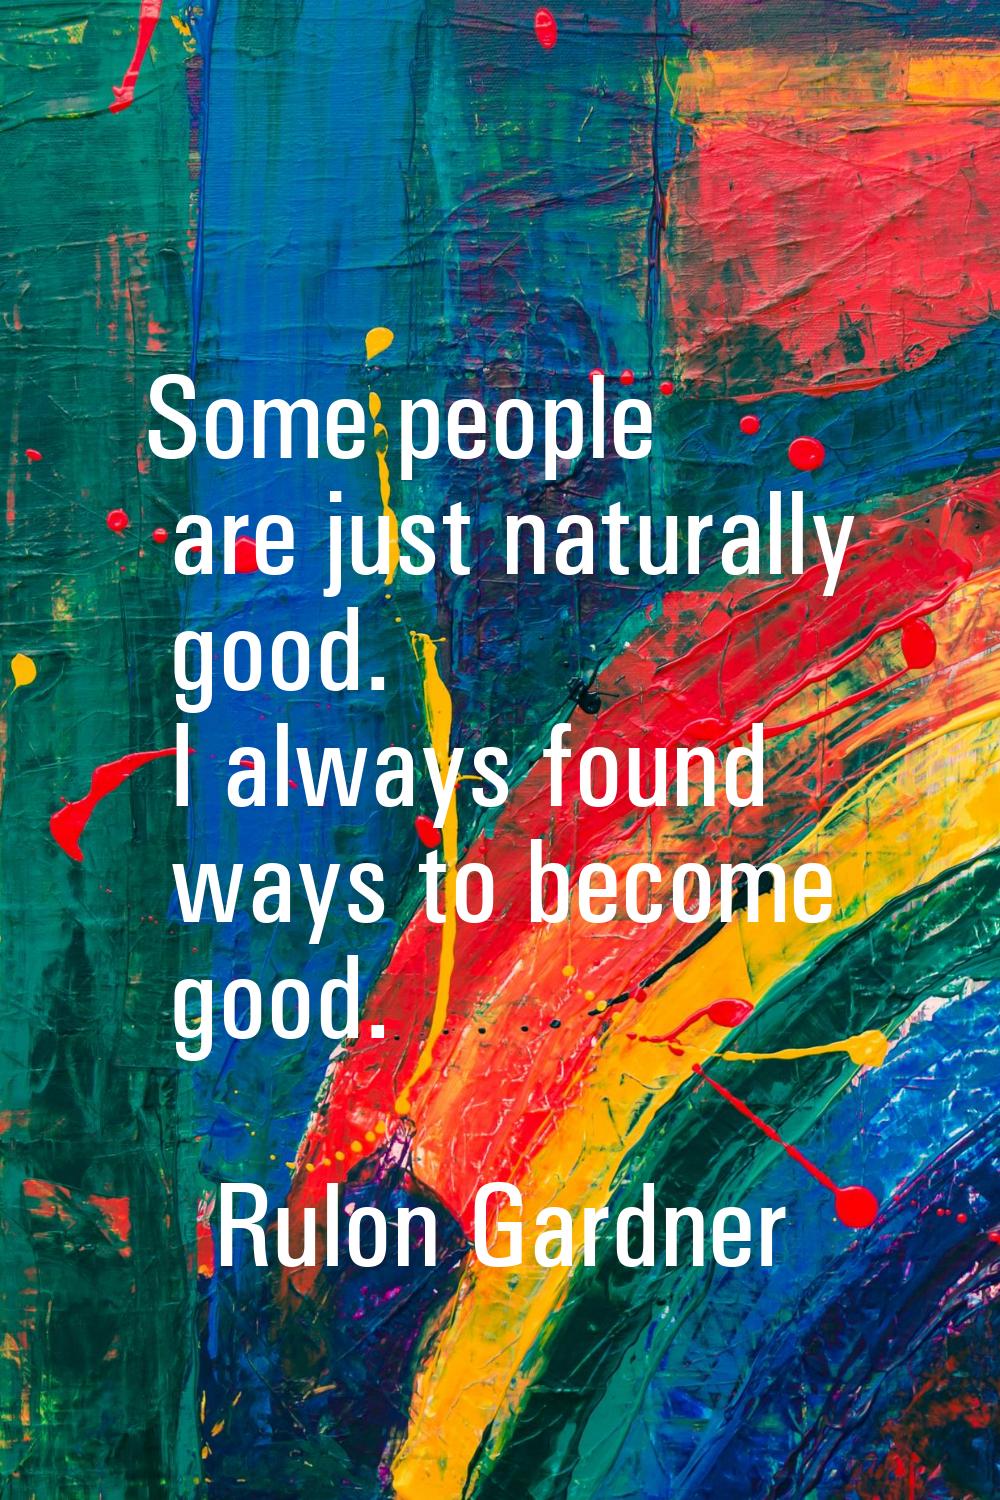 Some people are just naturally good. I always found ways to become good.